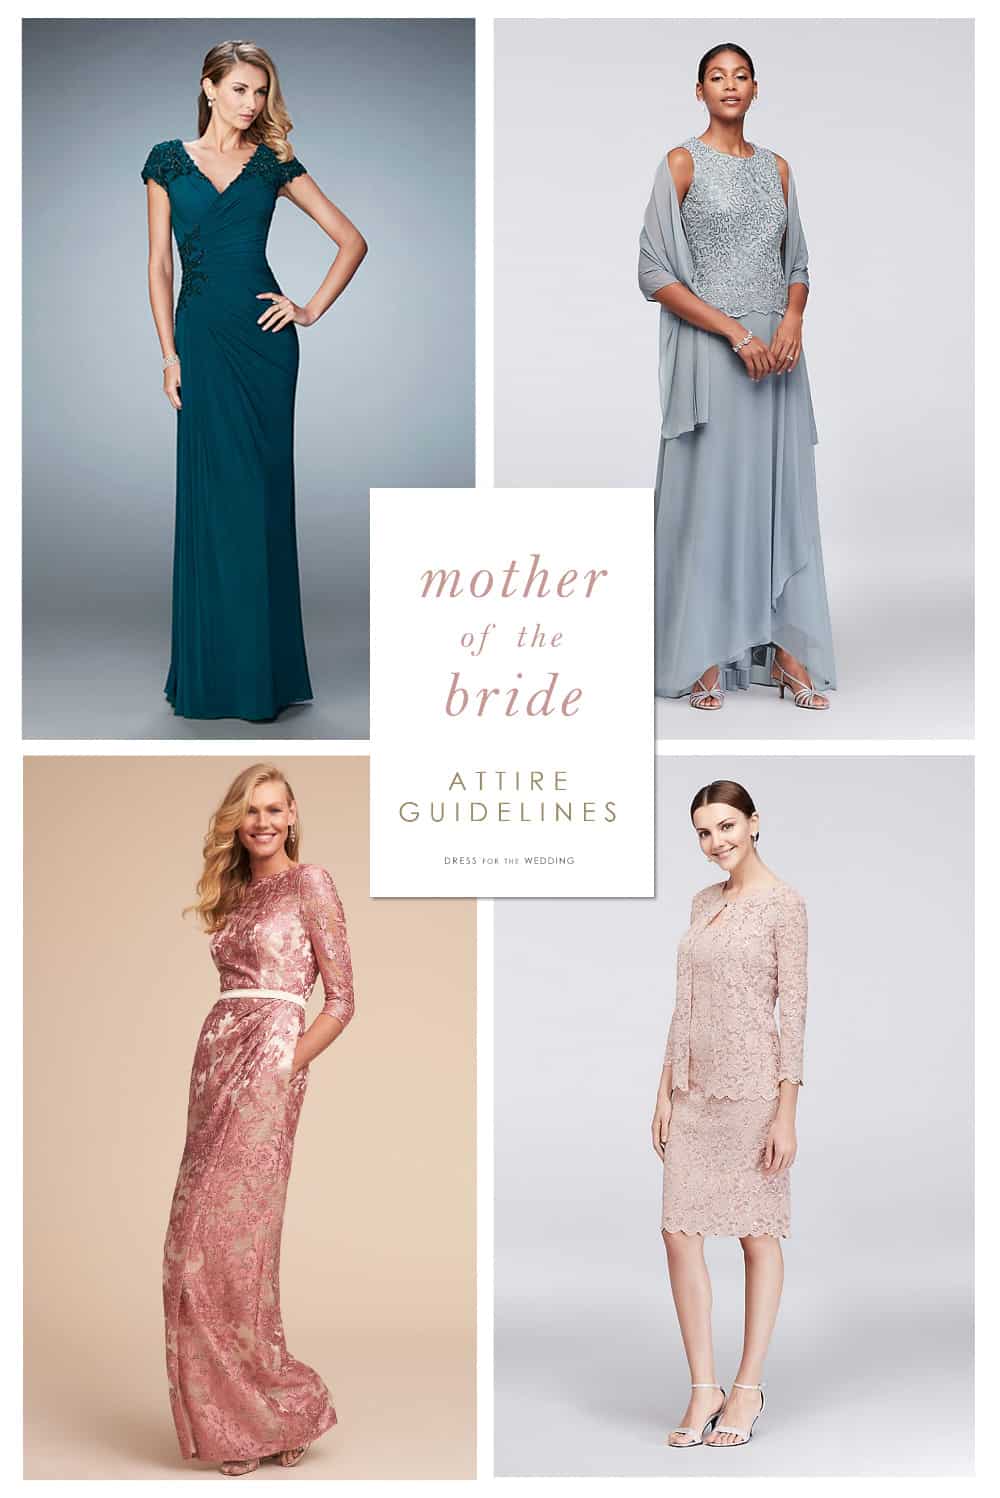 mother of the bride attire Guidelines